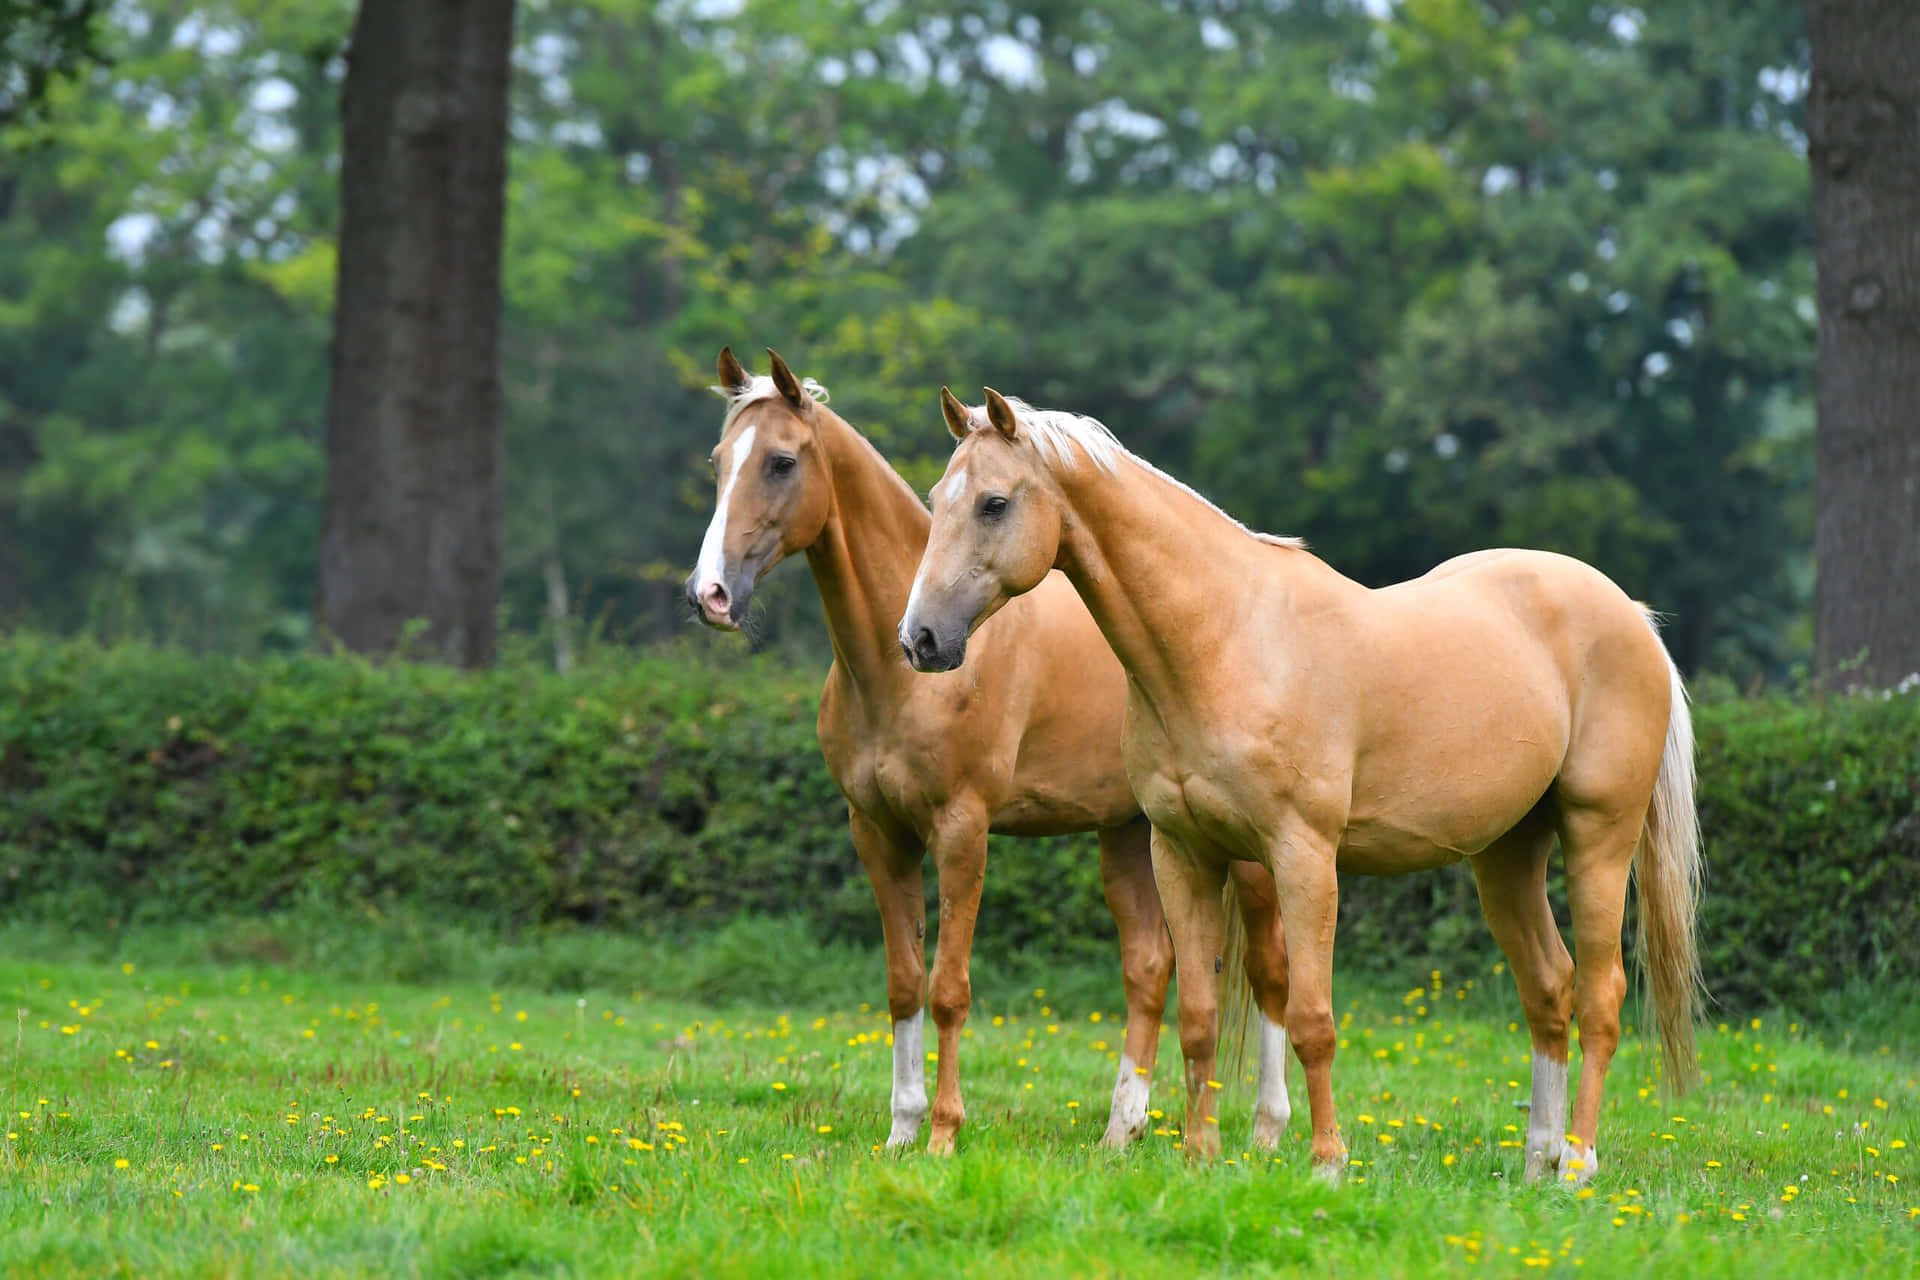 Palomino beauty running wild and free in the countryside